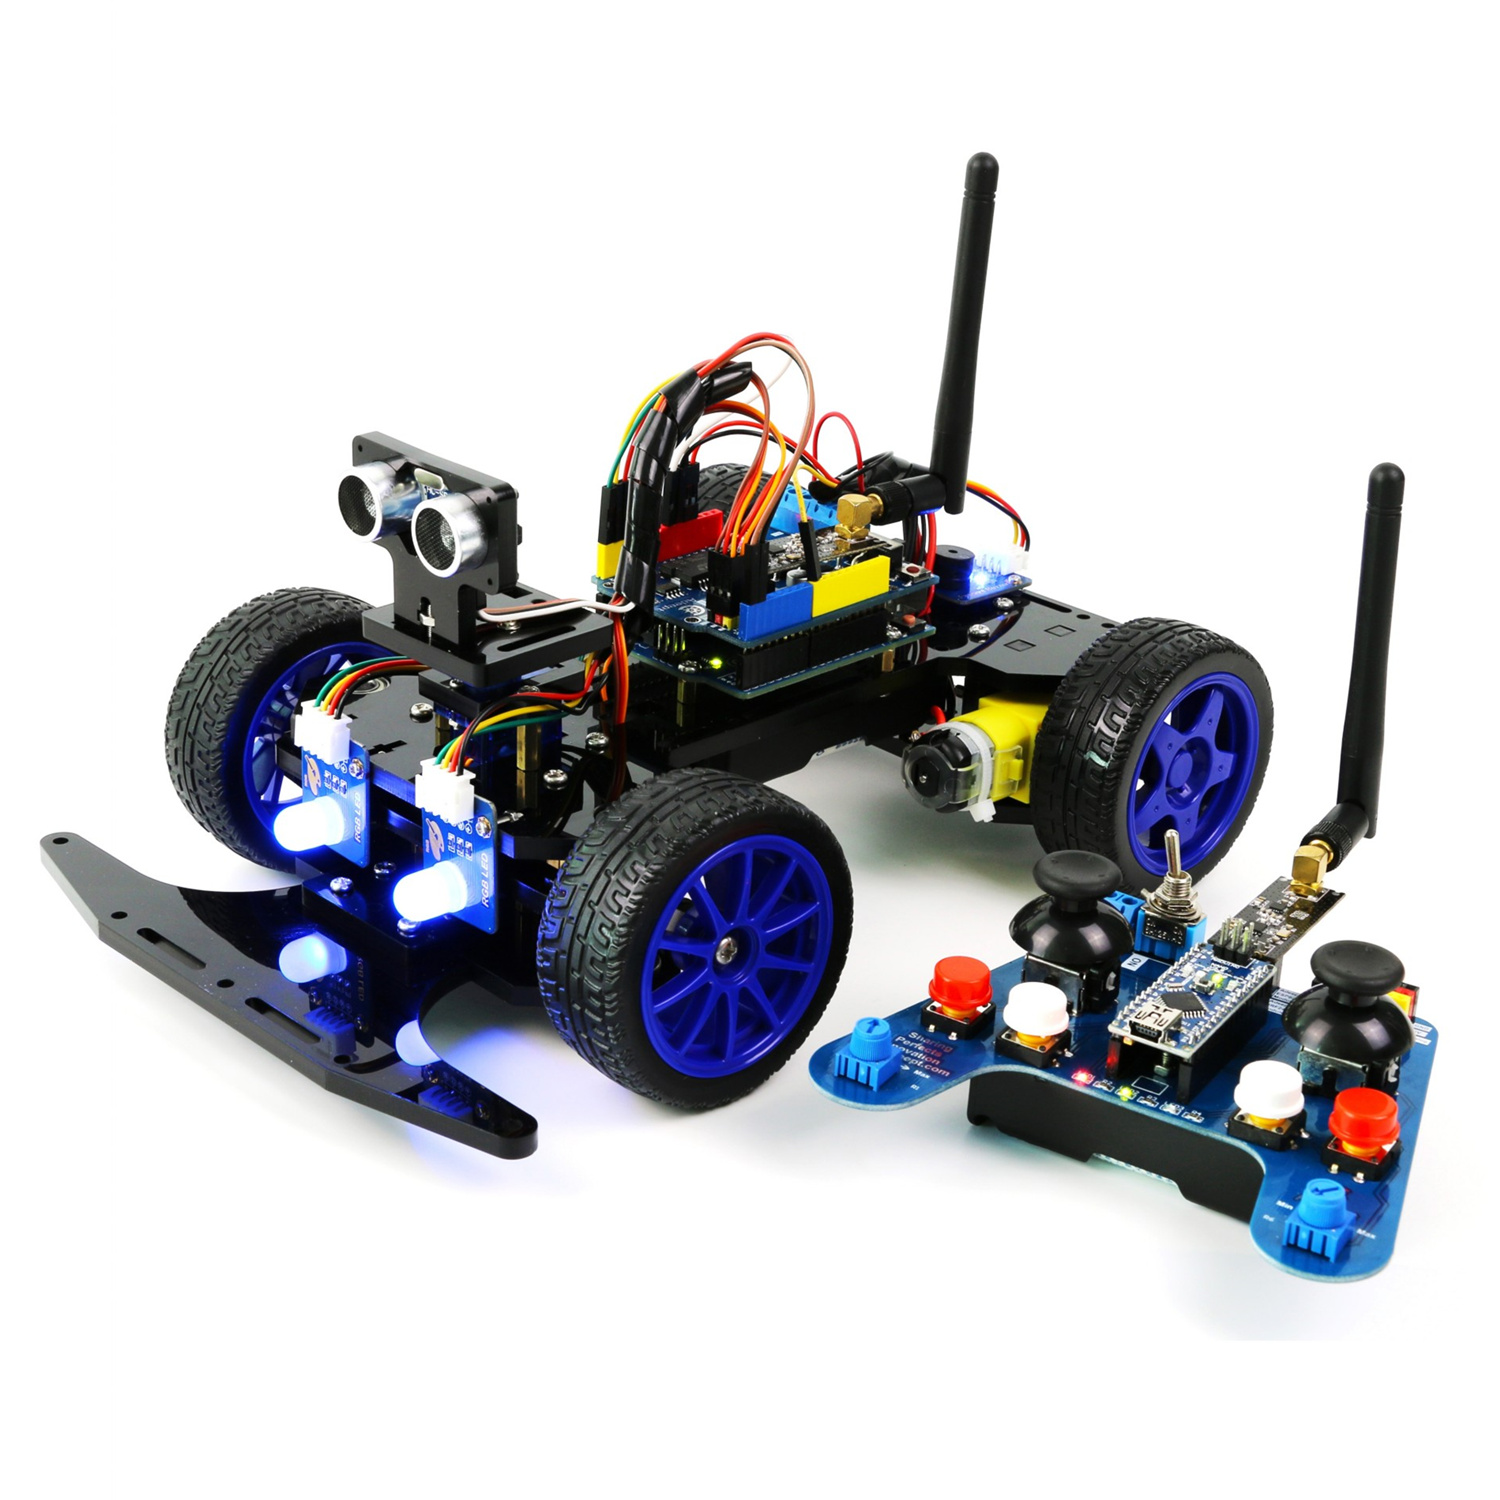 Adeept Remote Control Smart Car Kit for Arduino based on ...